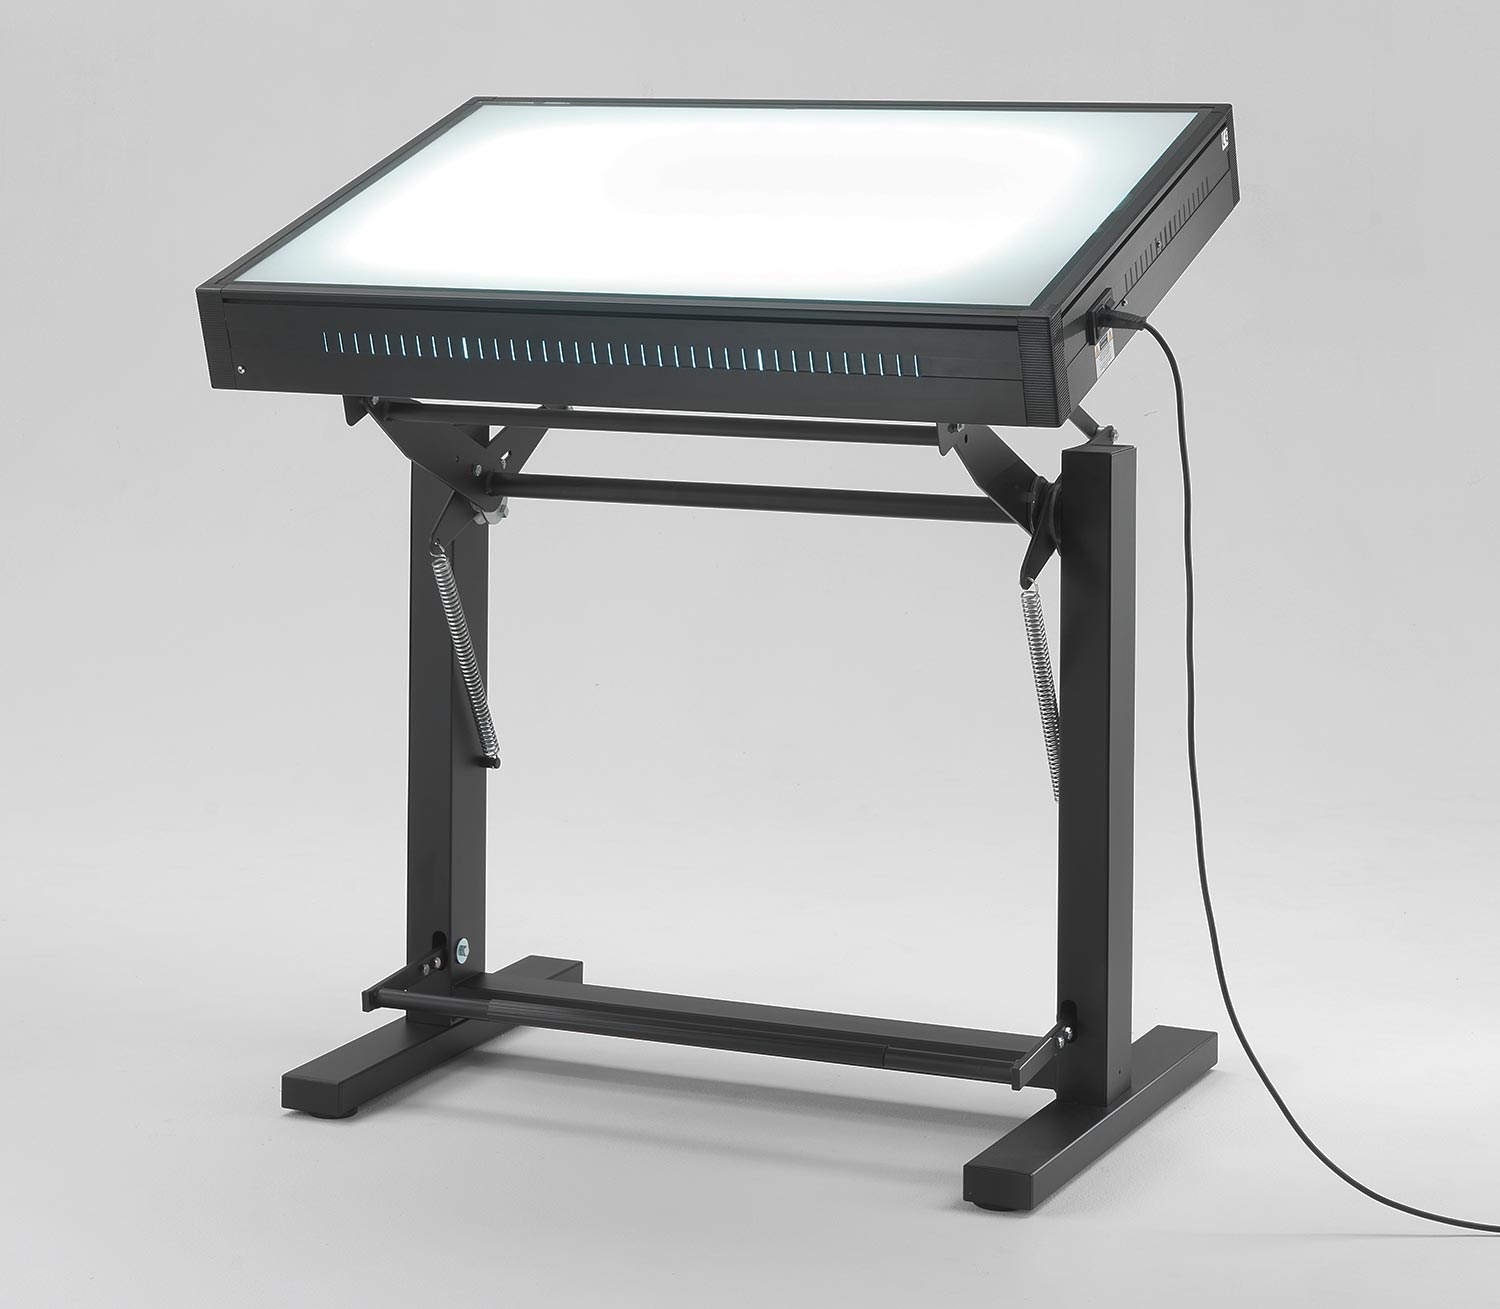 Light Tables and Light Boxes for drafting, architect, designer